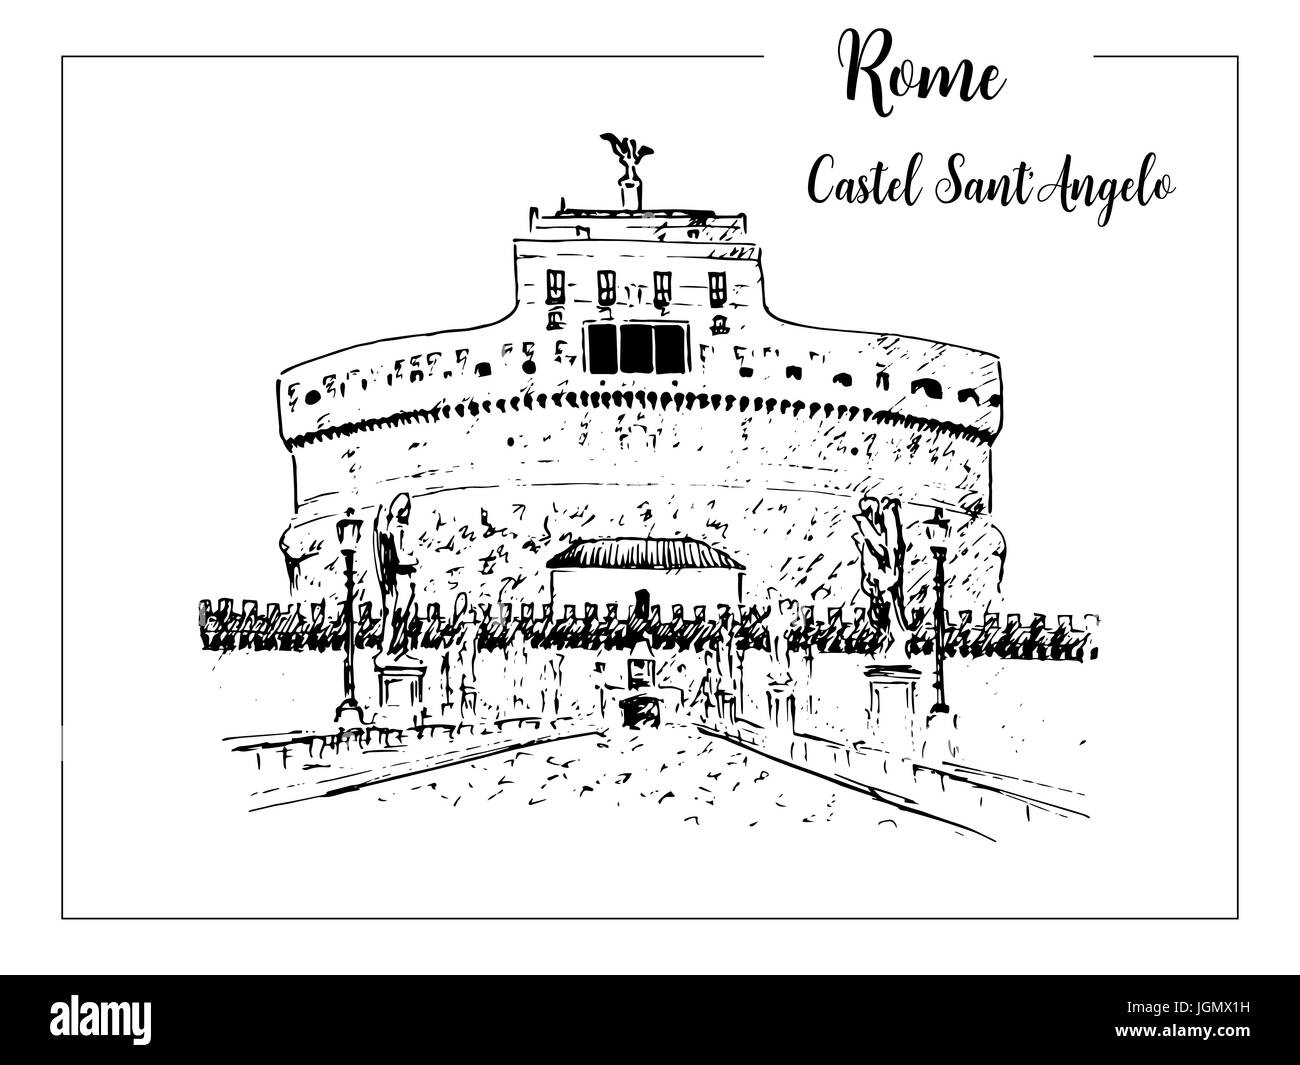 Castel Sant'Angelo. Rome architectural symbol. Beautiful hand drawn vector sketch illustration. Italy. skyline. For prints, textile, advertising, post Stock Vector